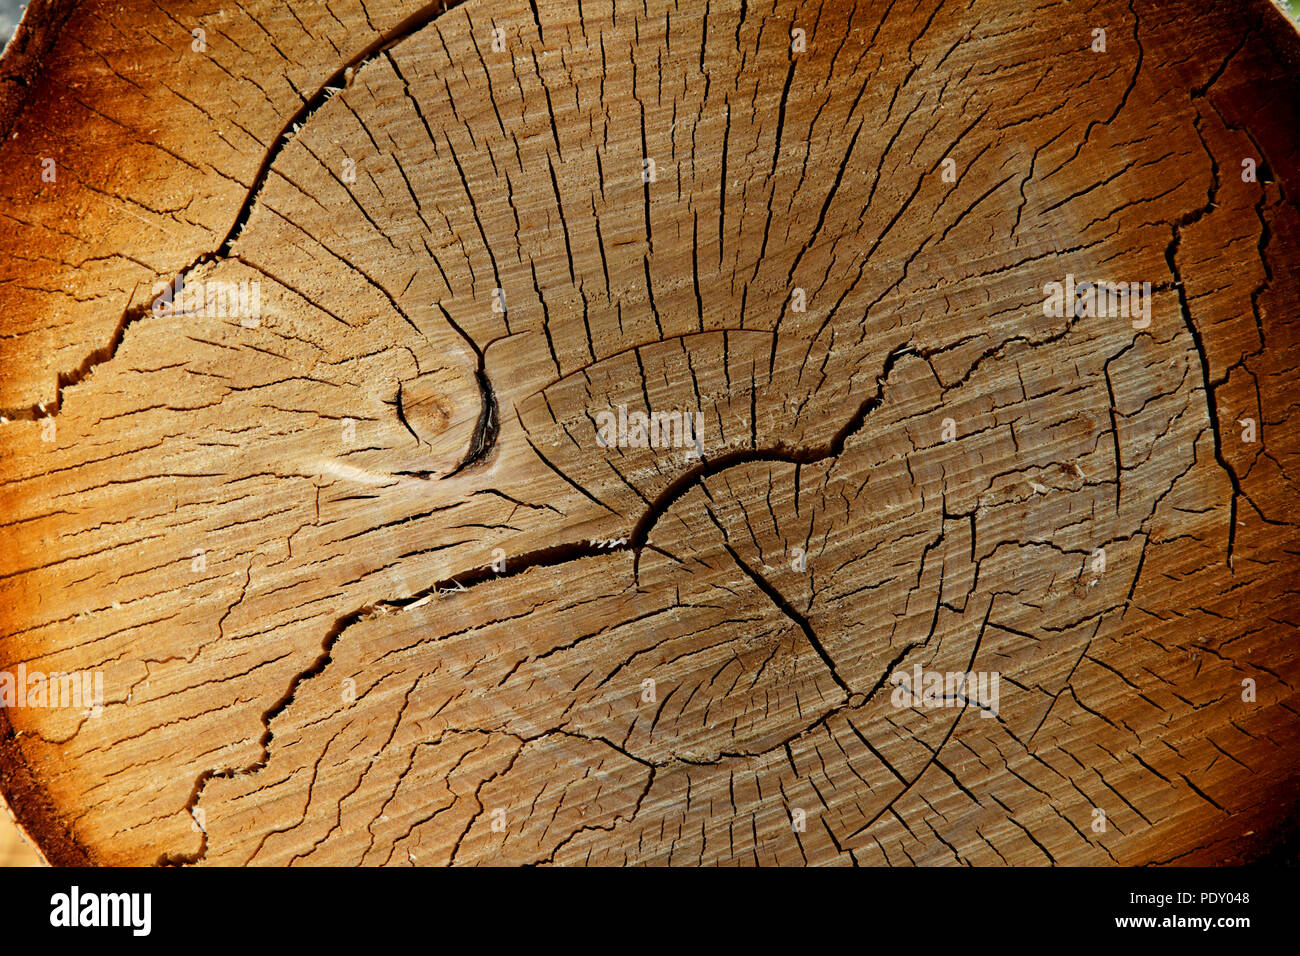 Counting Tree Rings On A Cut Log To Determine Its Age Stock Photo -  Download Image Now - iStock